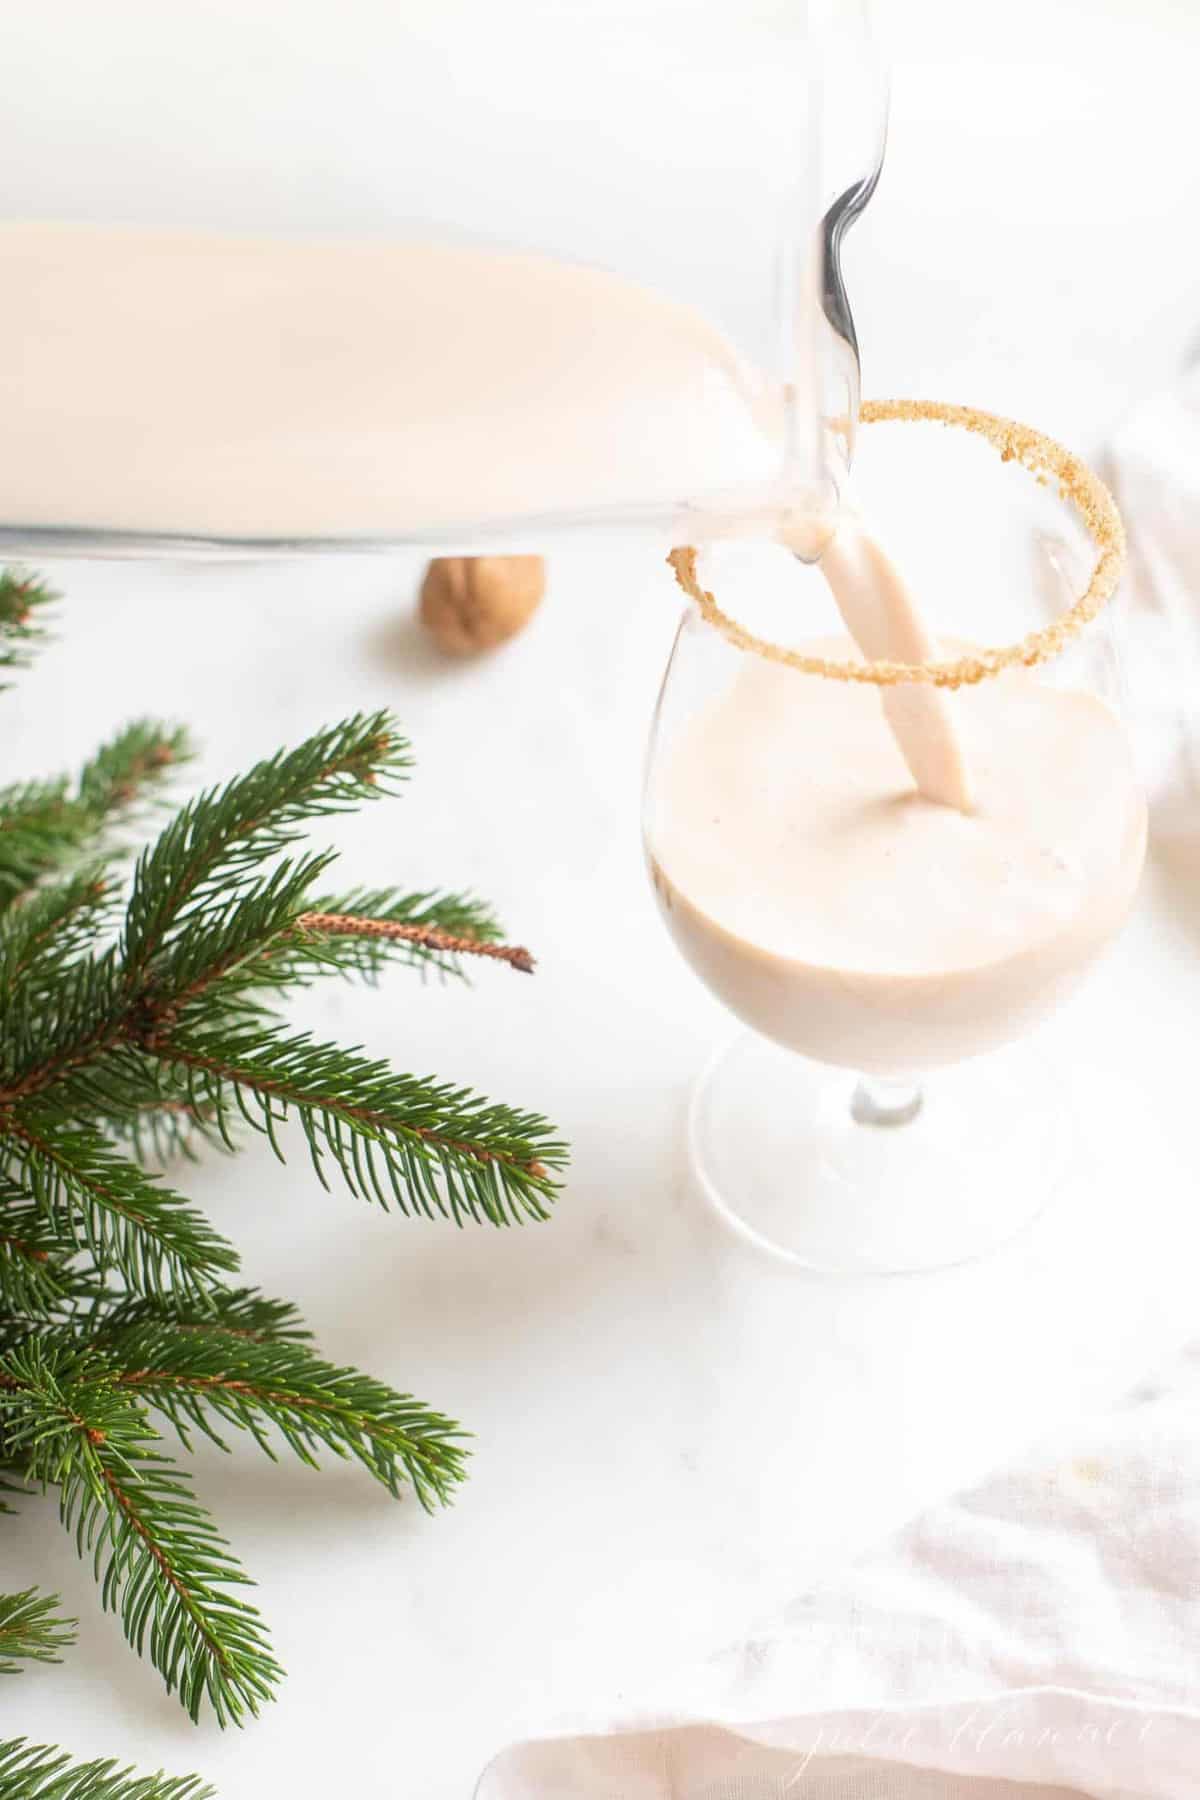 A oatmeal cookie cocktail in a clear glass, holiday greenery to the side, pitcher pouring into glass.